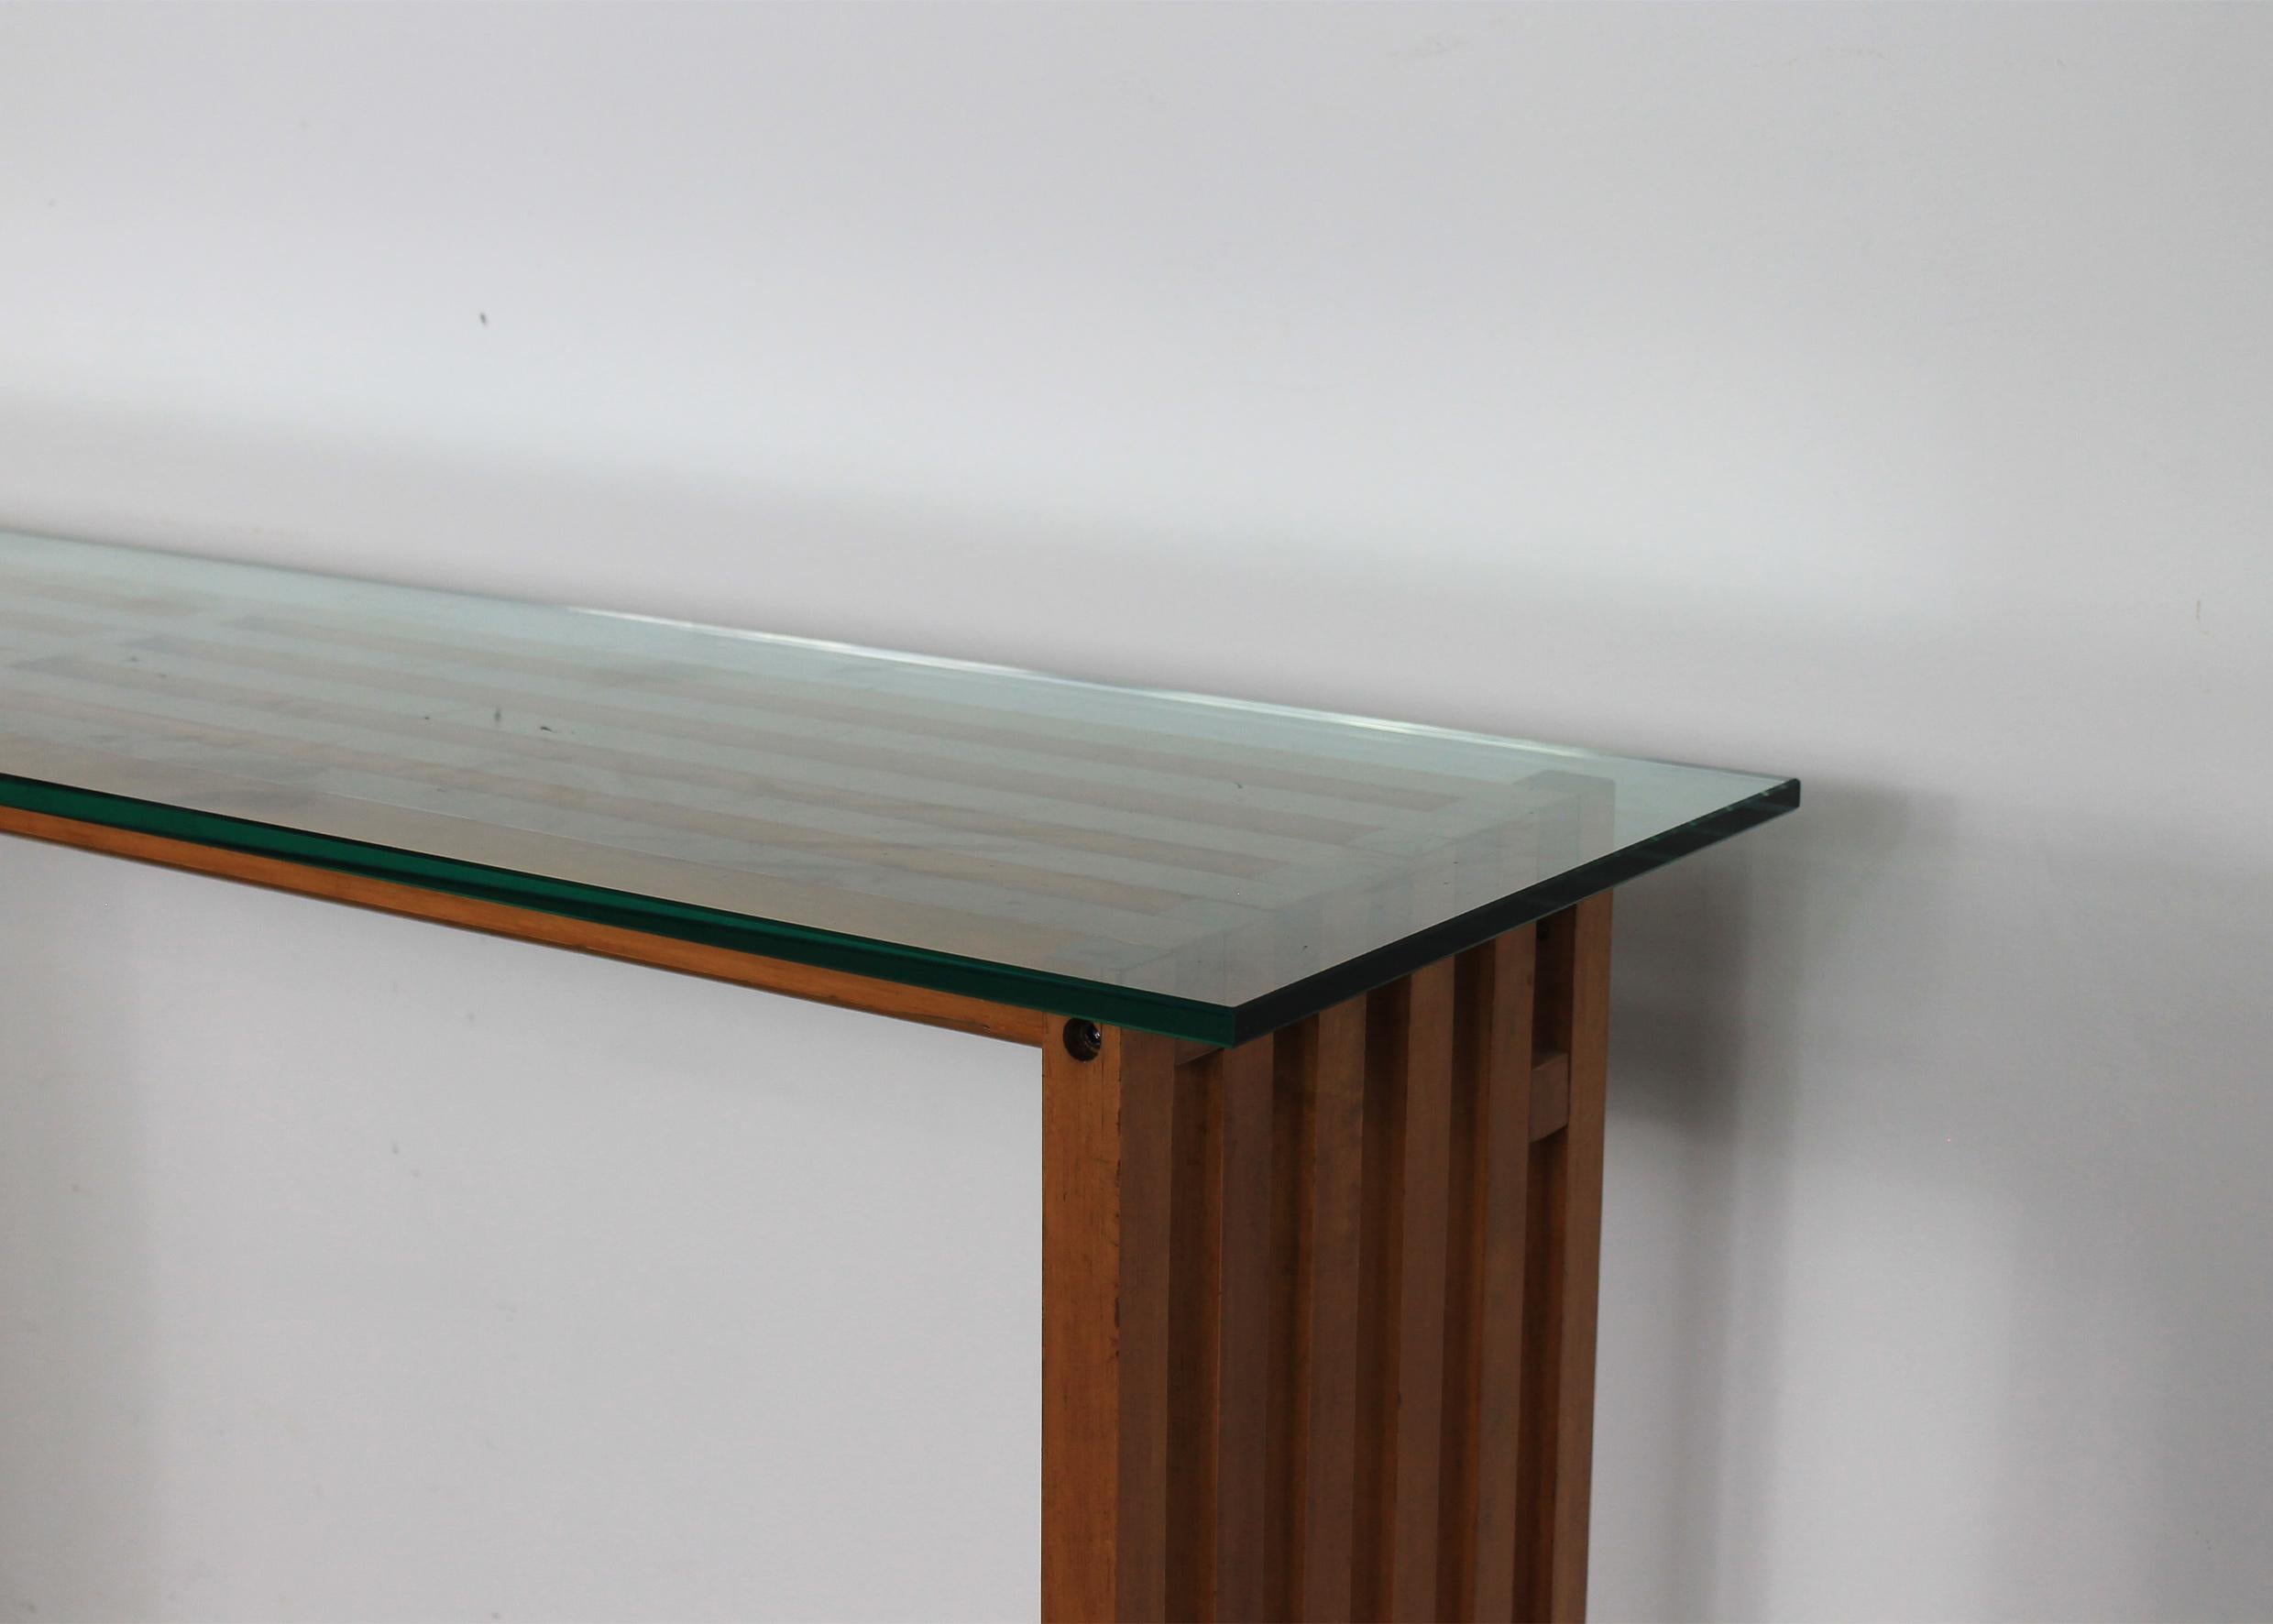 Lella & Massimo Vignelli Ara Console Table in Wood and Glass by Driade 1974  For Sale 2